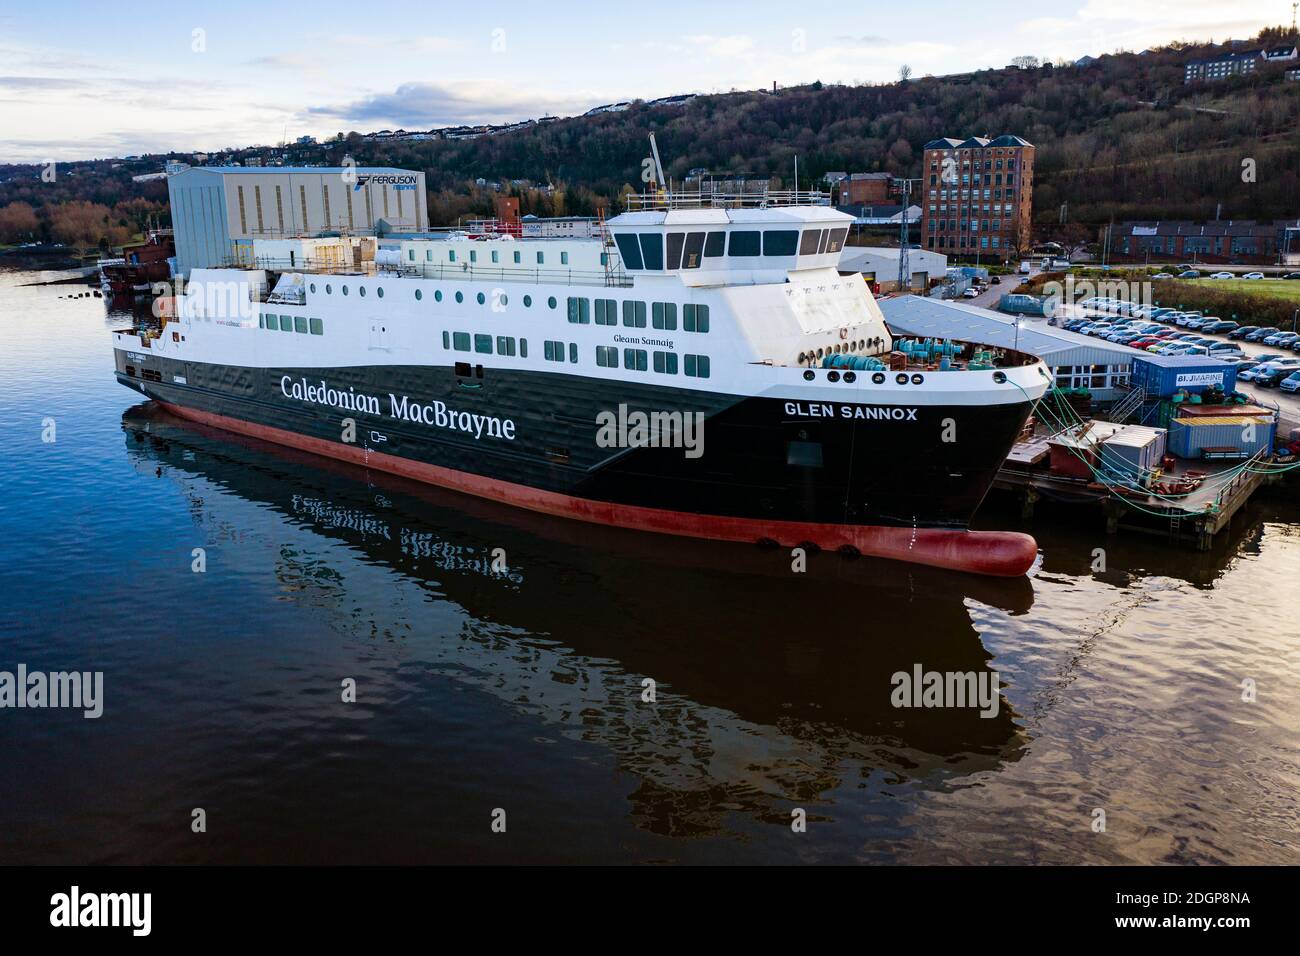 Port Glasgow, Scotland, UK. 9 December 2020. Aerial view of CalMac ferry MV Glen Sannox under fabrication at Ferguson Marine shipyard in Port Glasgow. The Scottish ParliamentÕs Rural Economy and Connectivity Committee publish damning report criticising all aspects of the over budget and overdue project. Iain Masterton/Alamy Live News Stock Photo